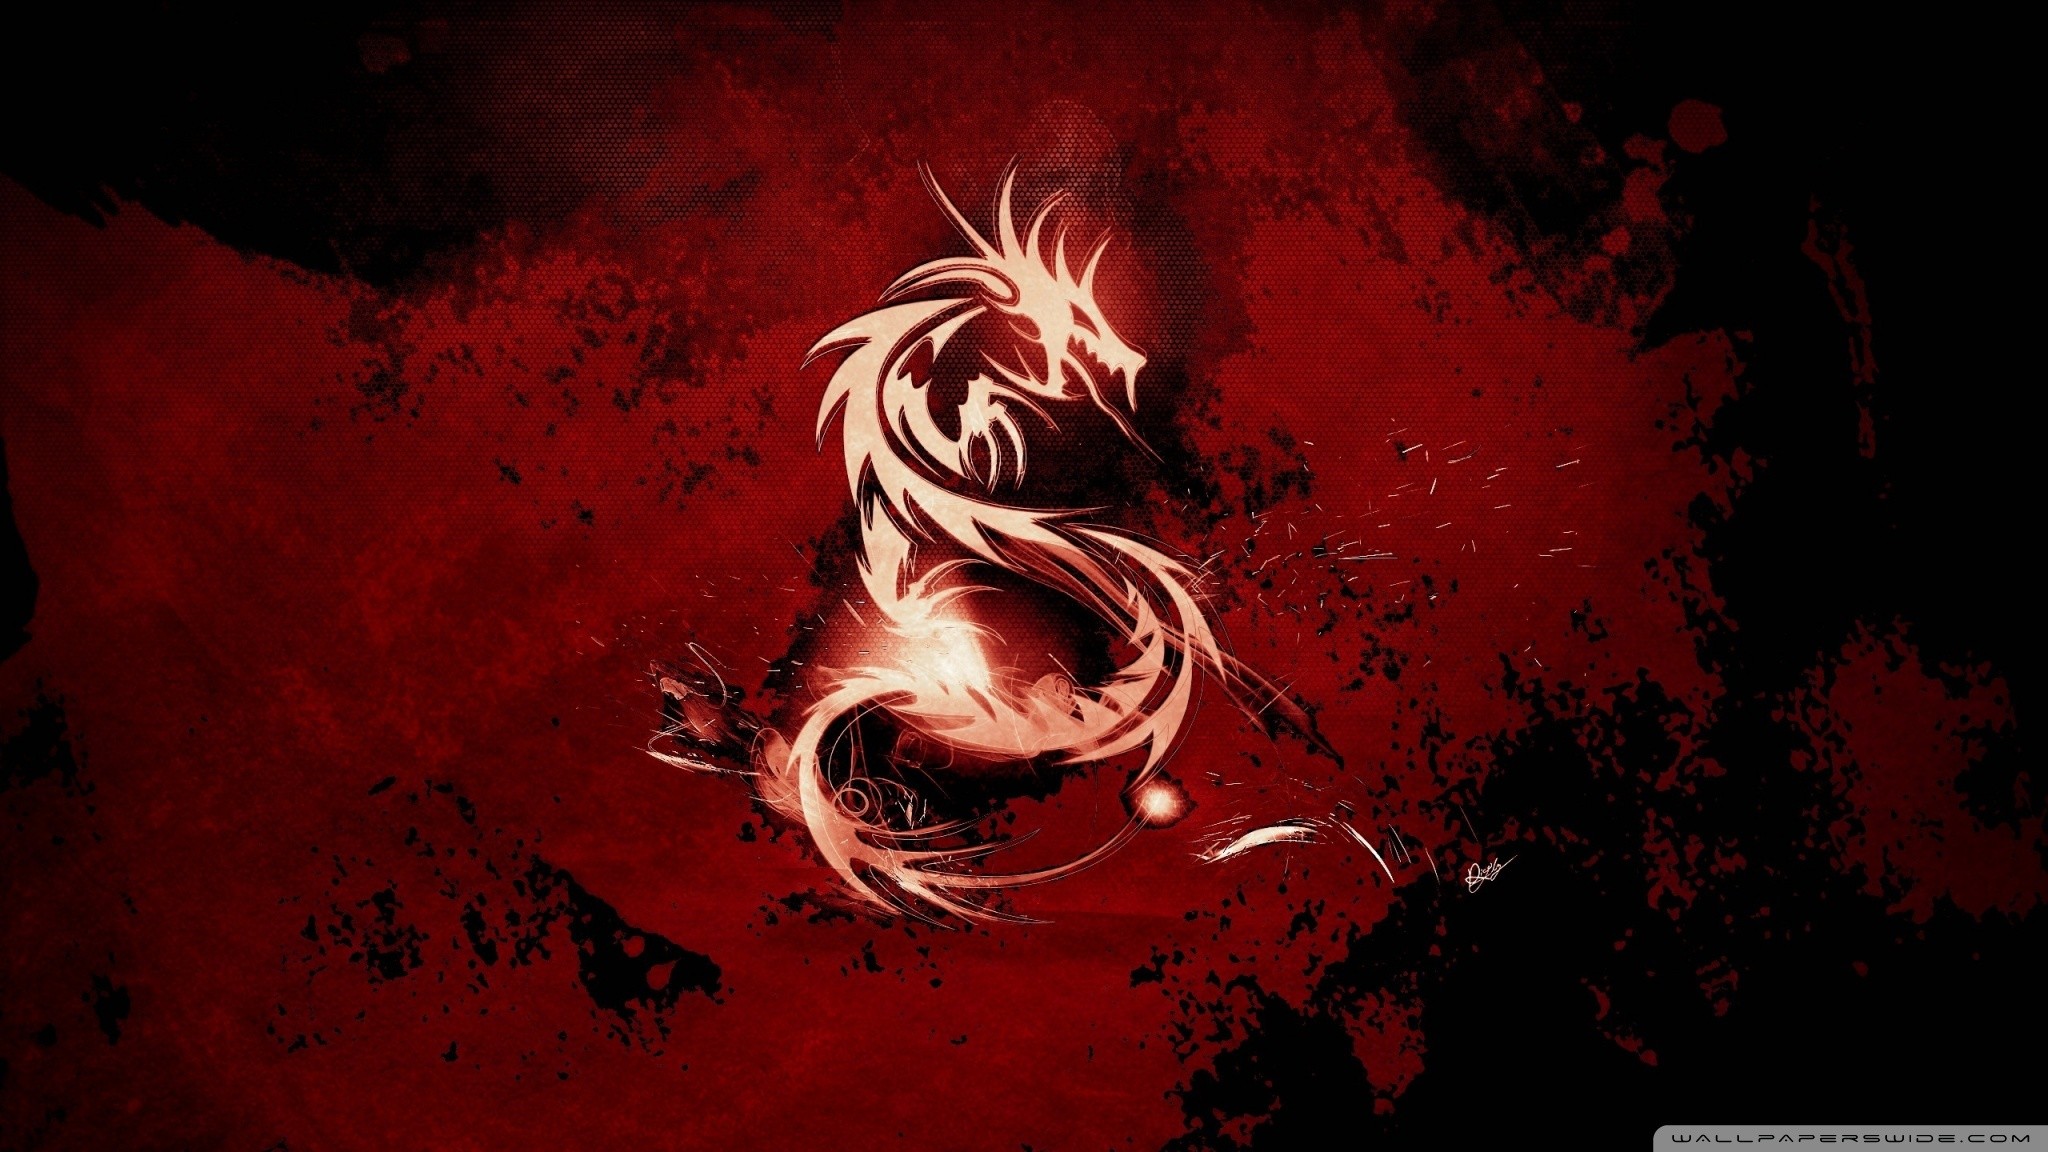 General 2048x1152 dragon red background artwork abstract